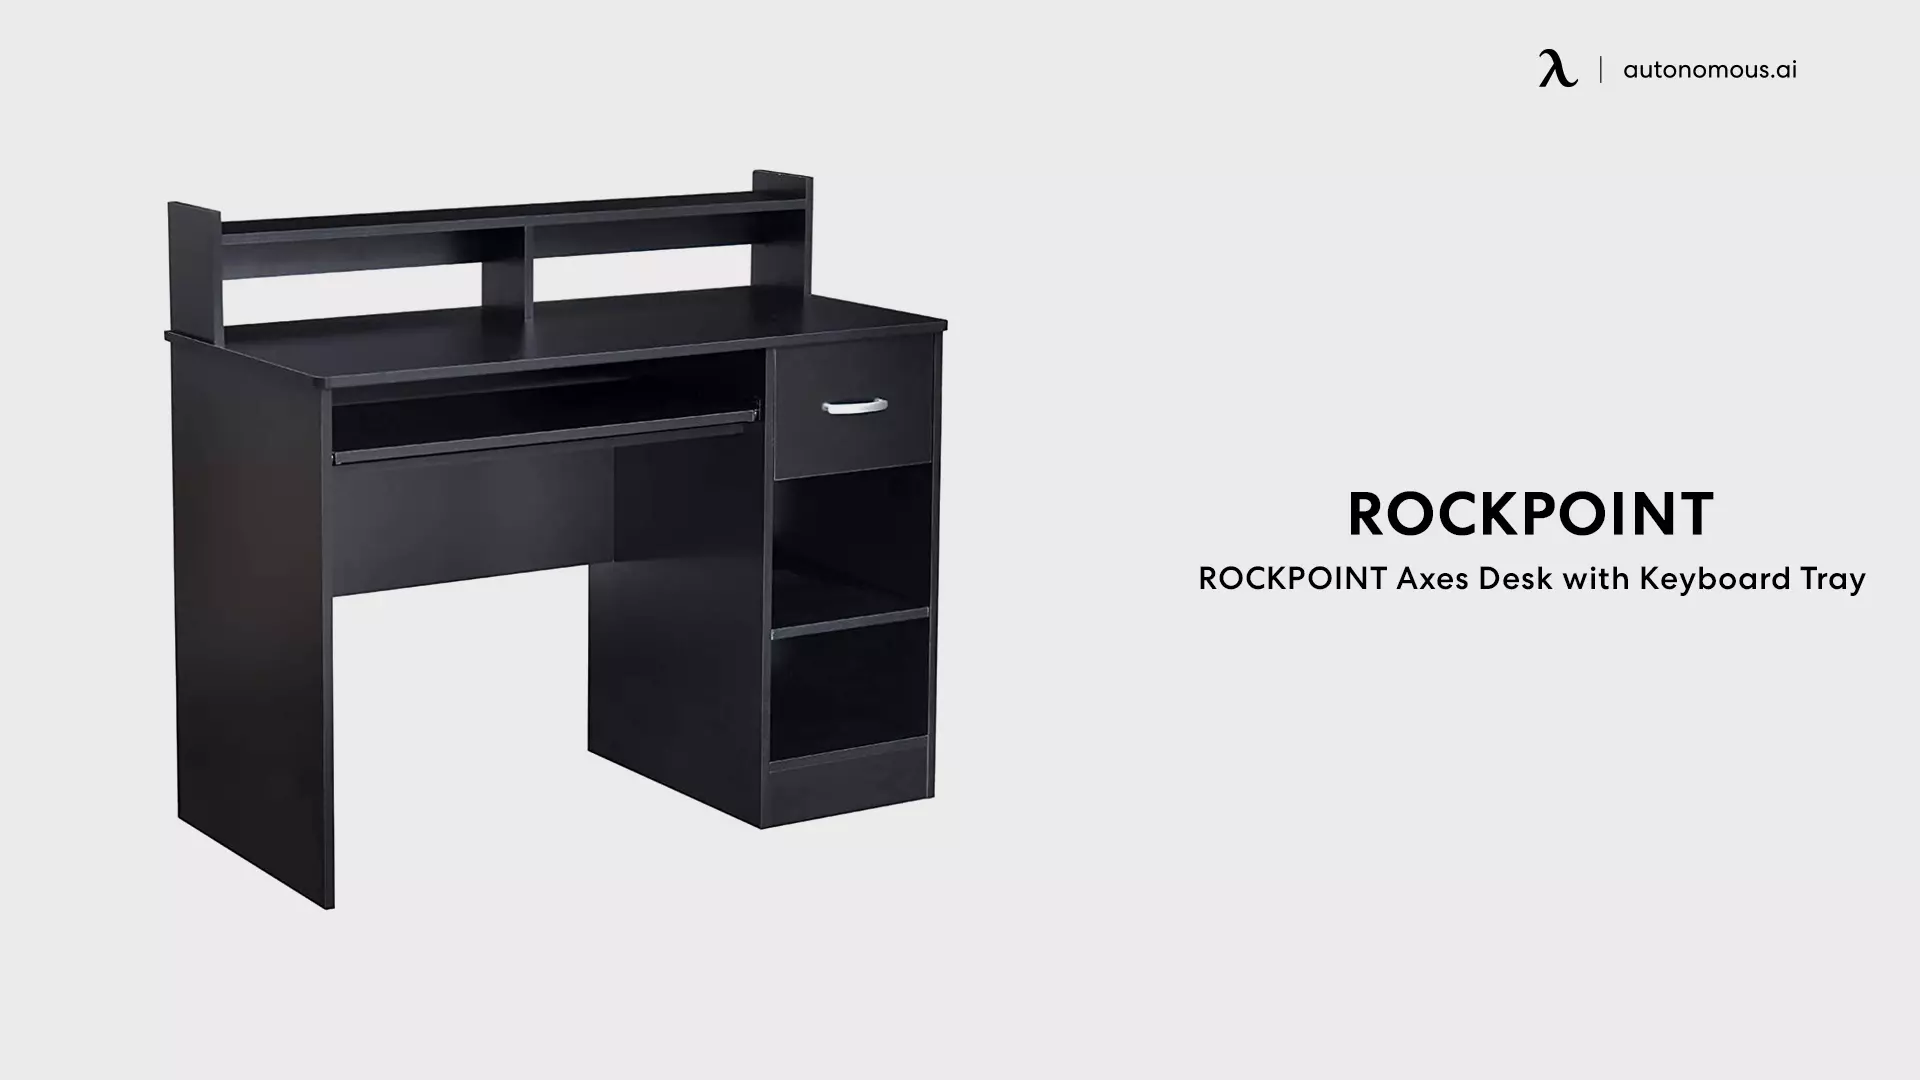 ROCKPOINT Axes Desk with Keyboard Tray